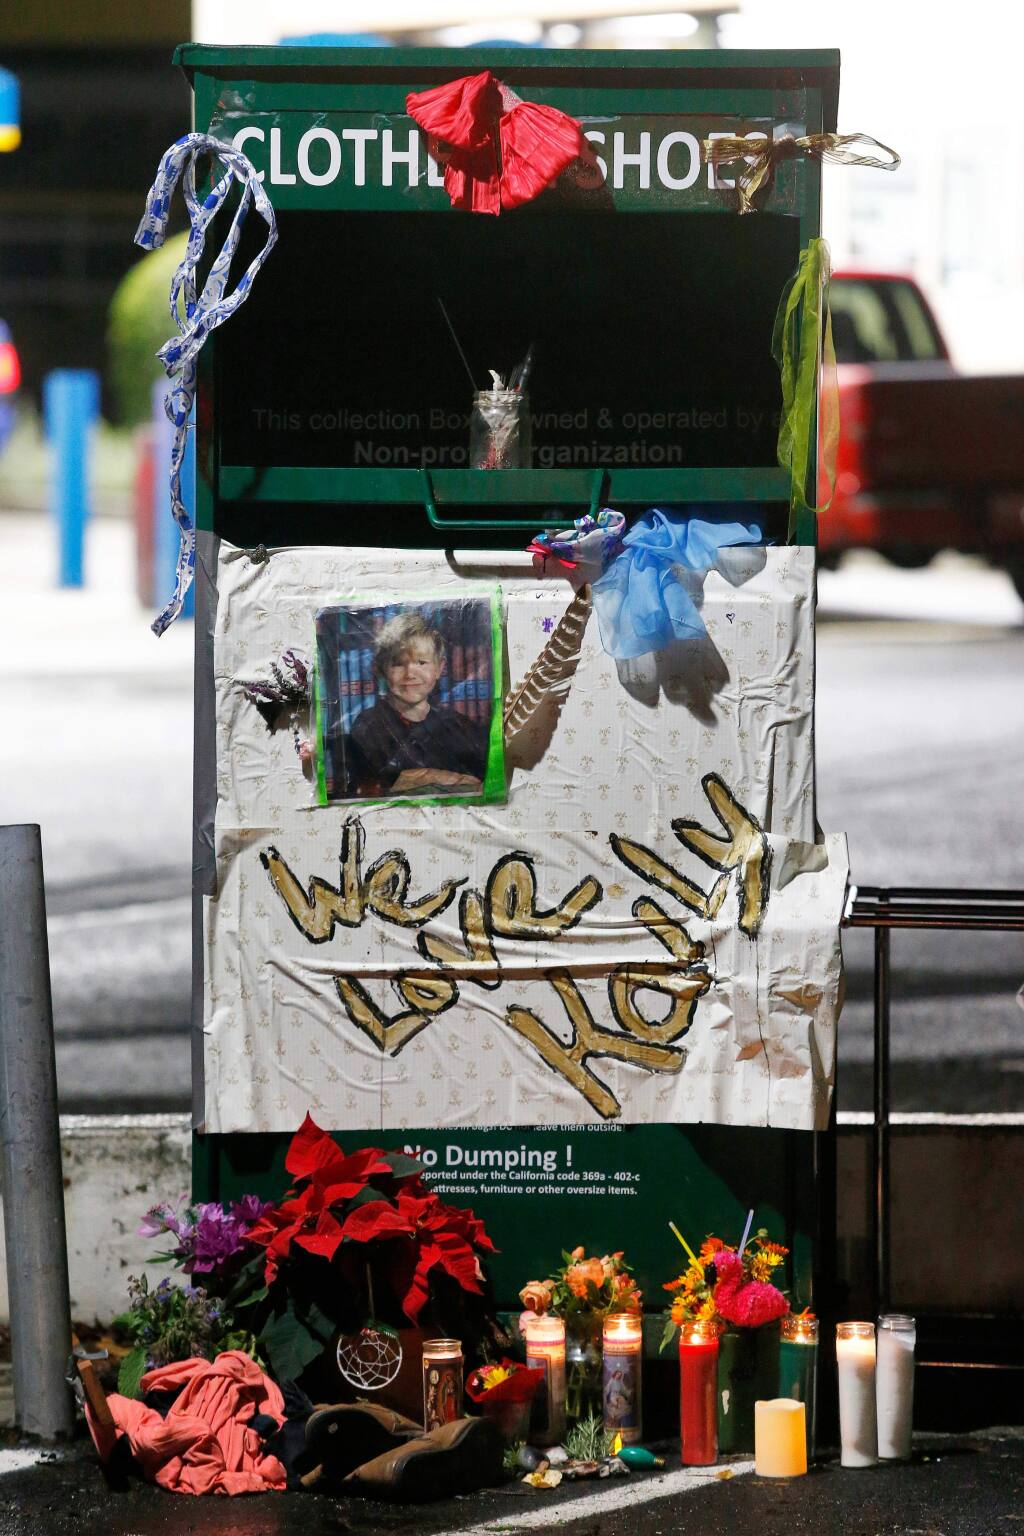 Clothing donation box in Petaluma that caused woman's death will